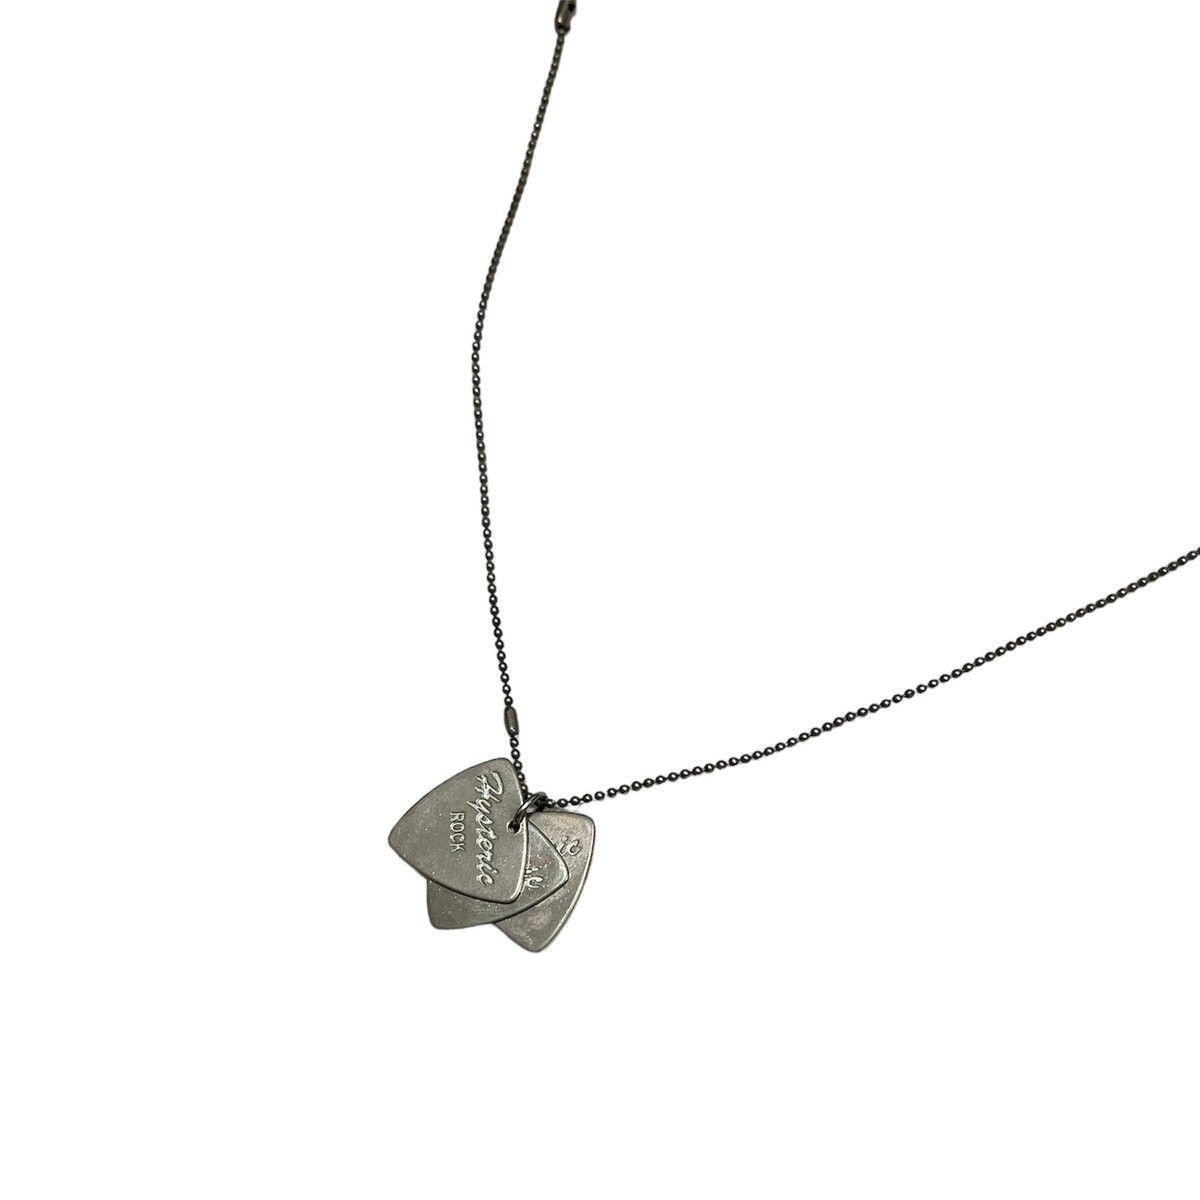 Hysteric Glamour silver guitar pick necklace - 2